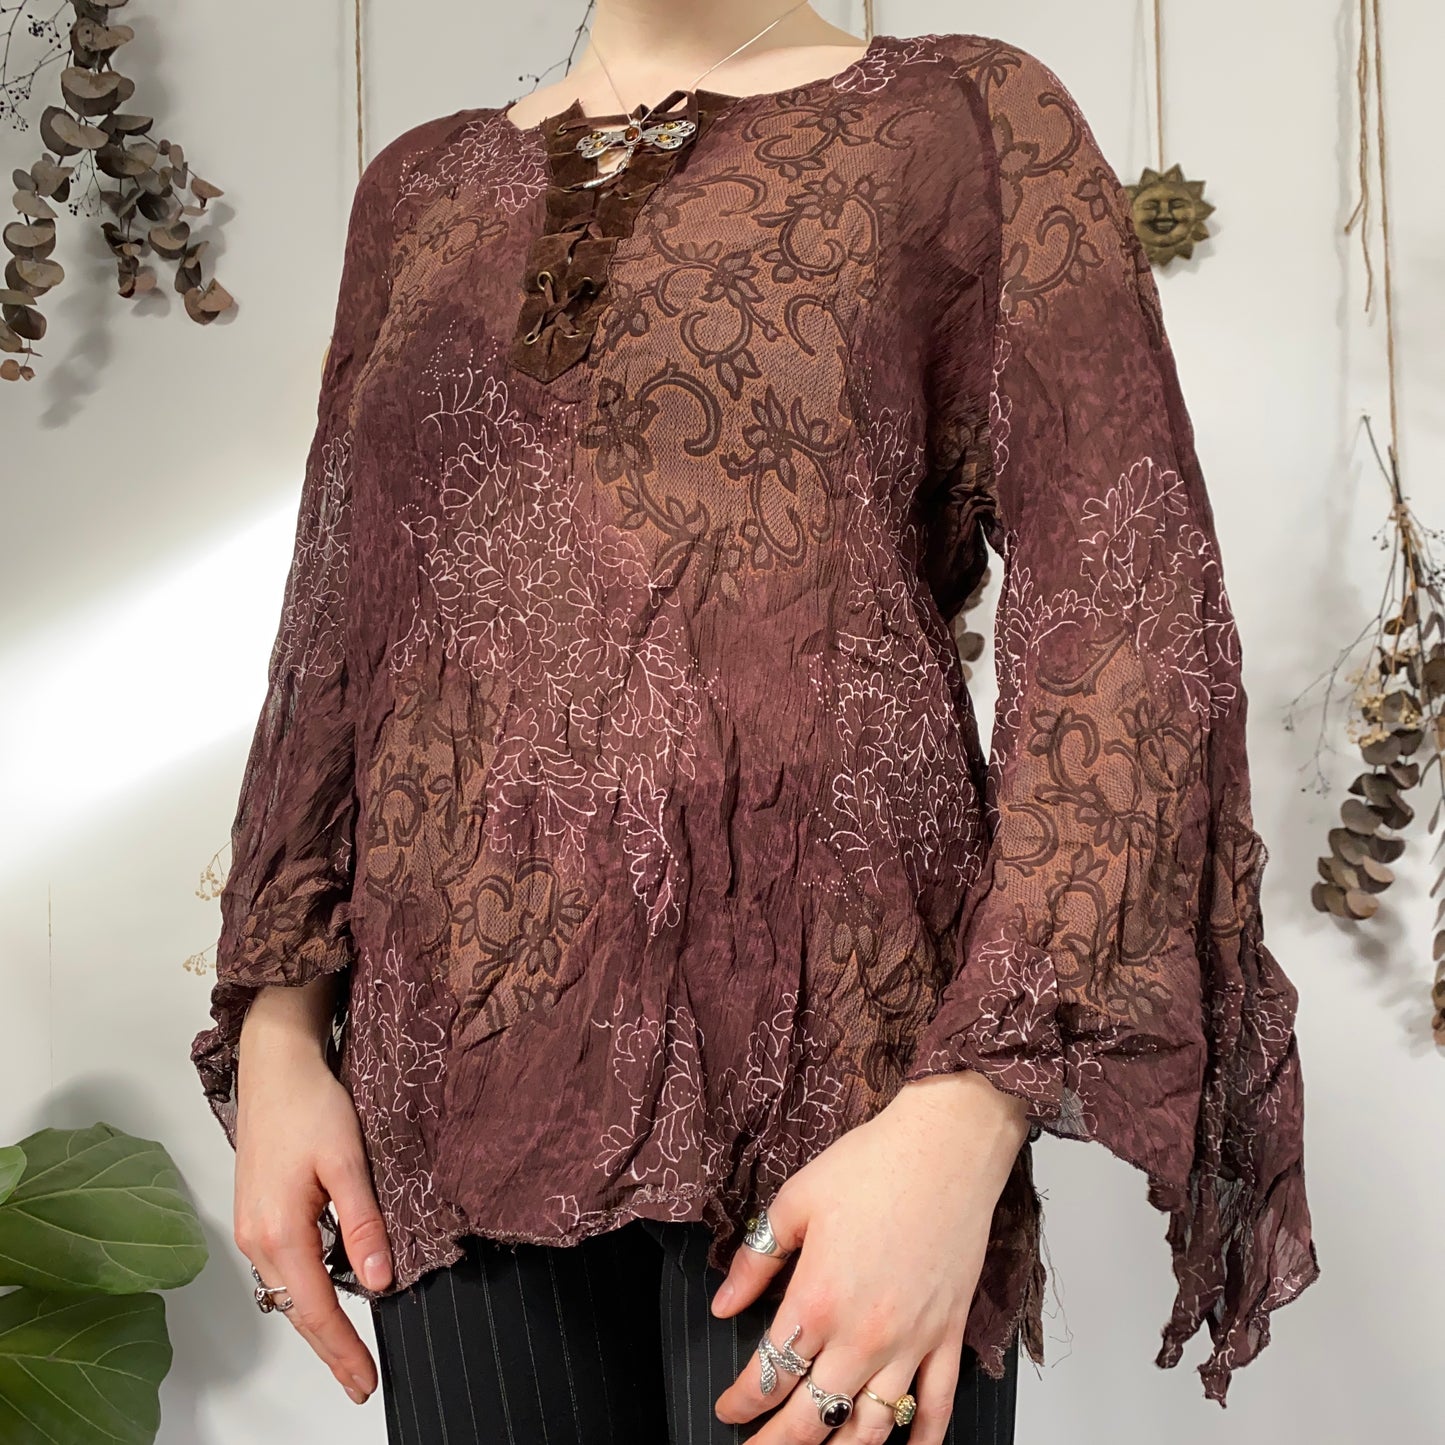 Brown floaty top - size L/XL